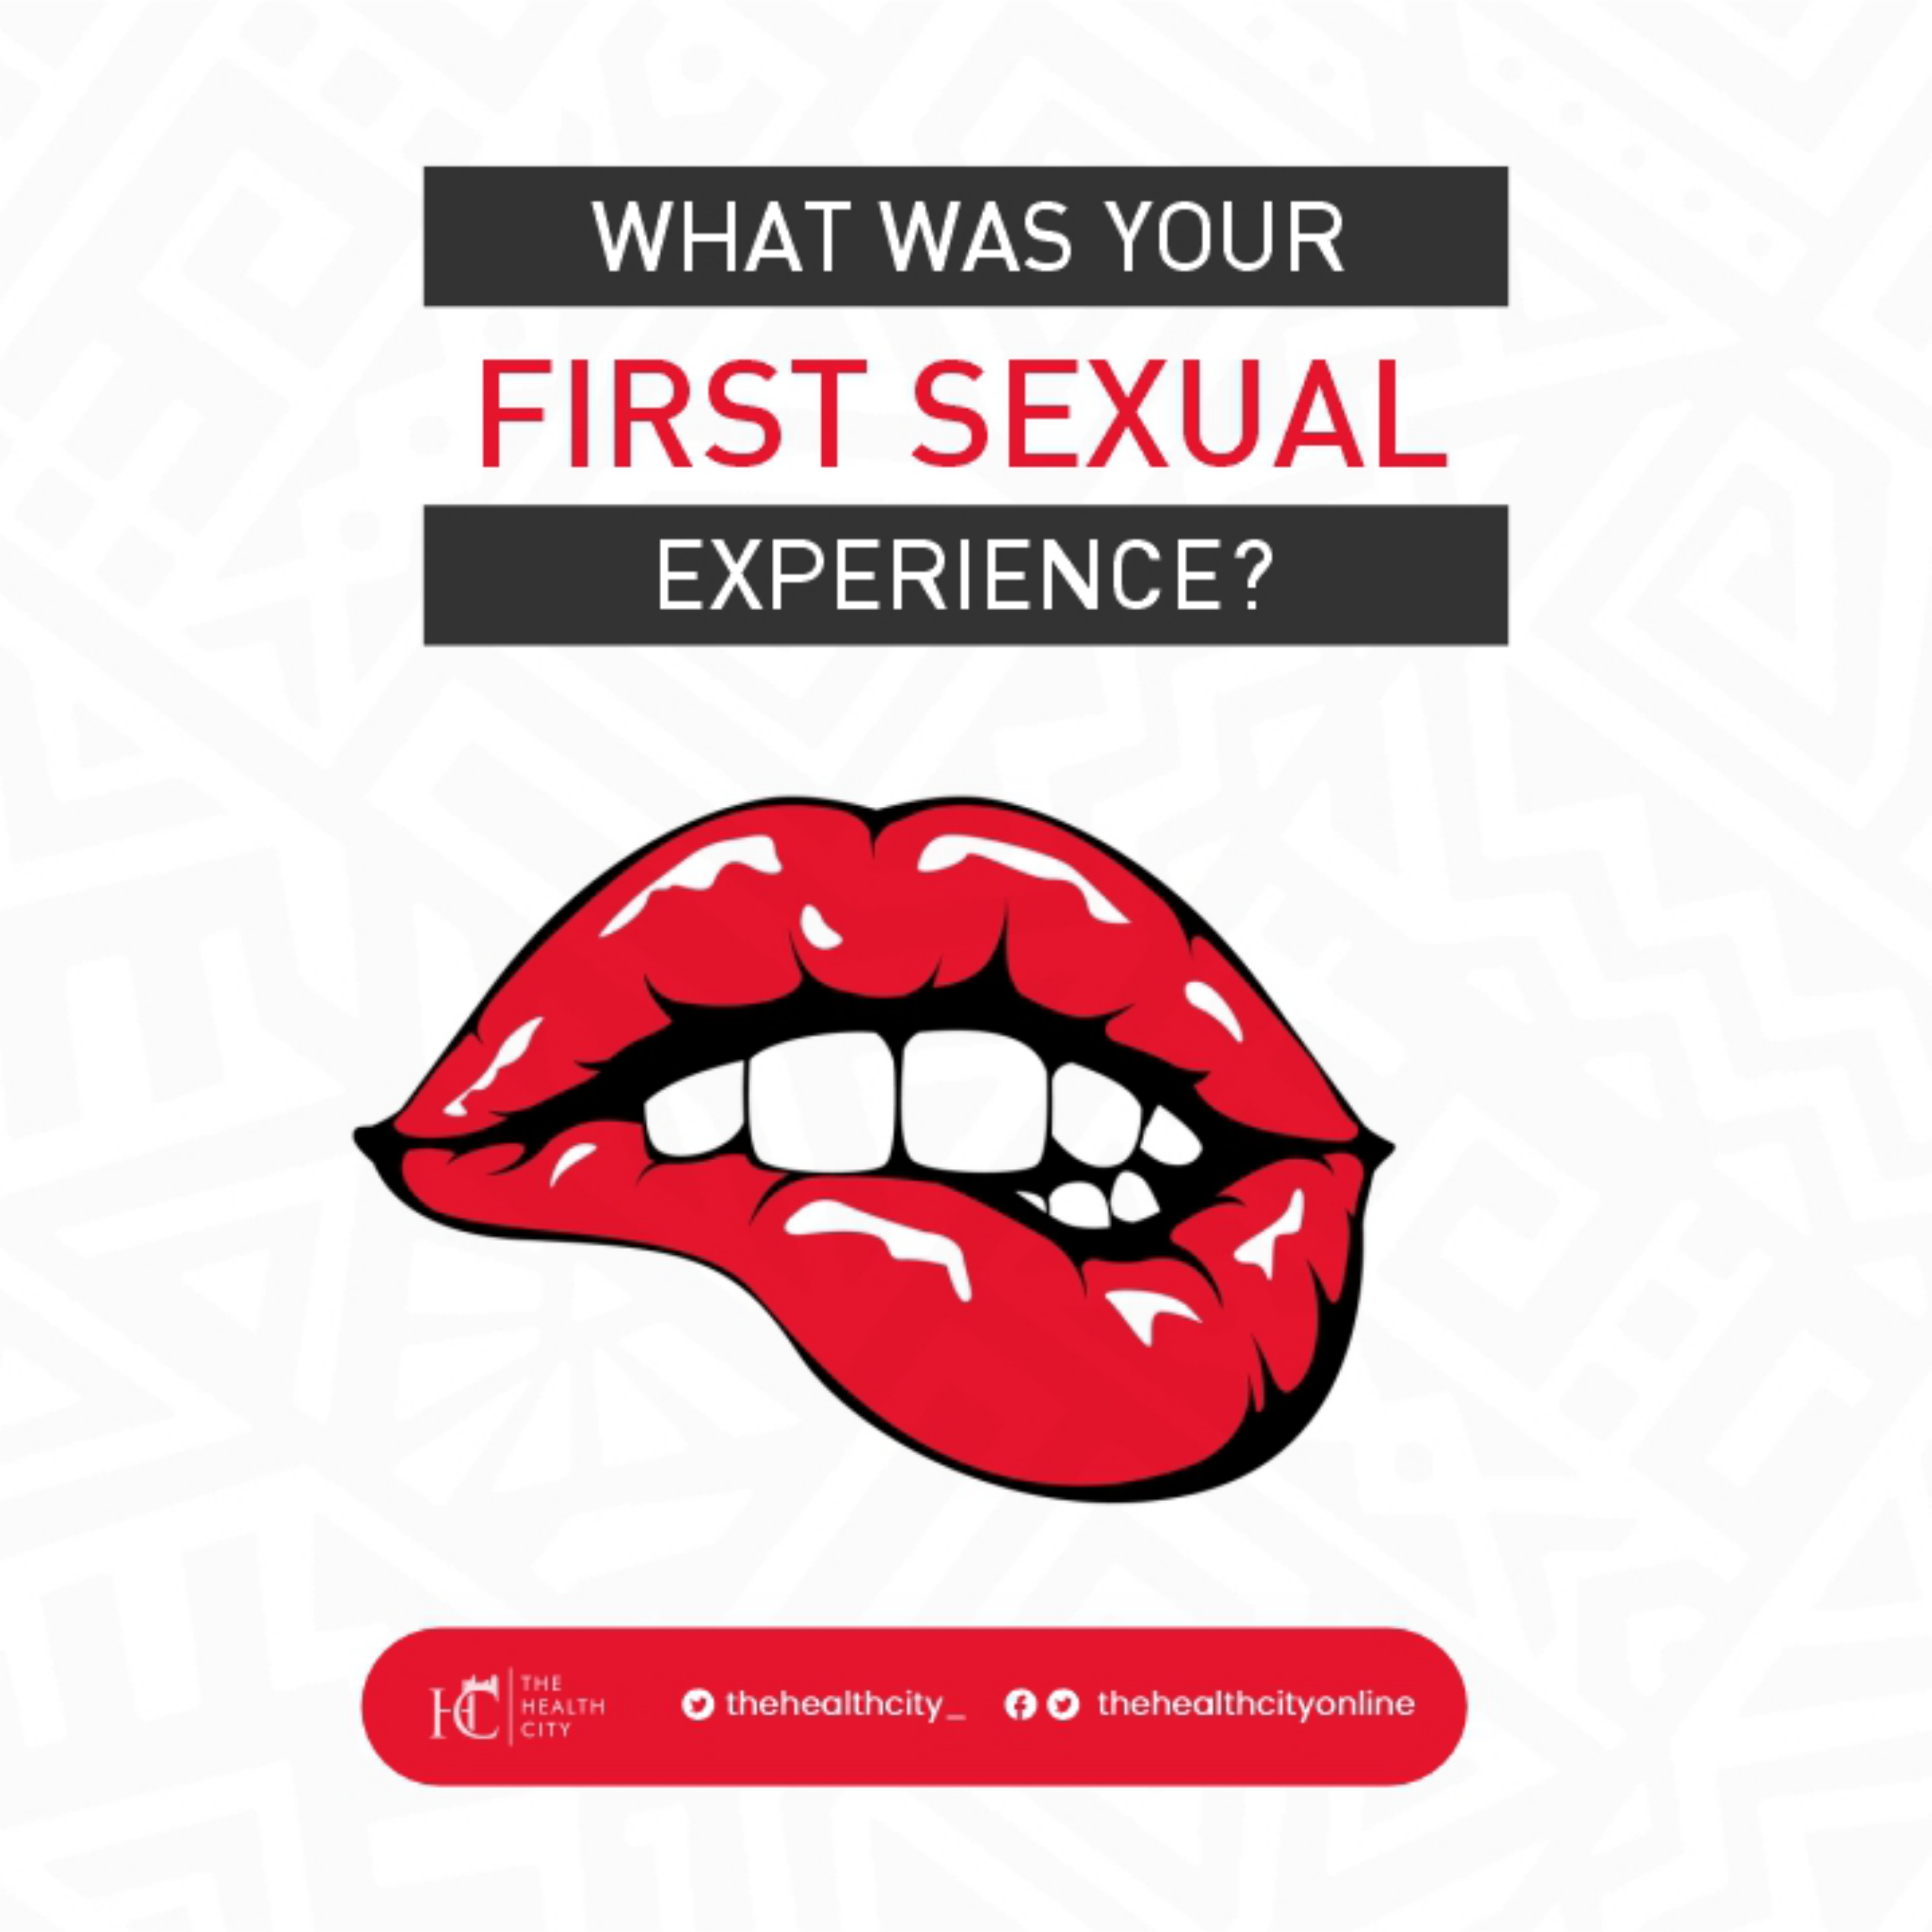 My first sex experience